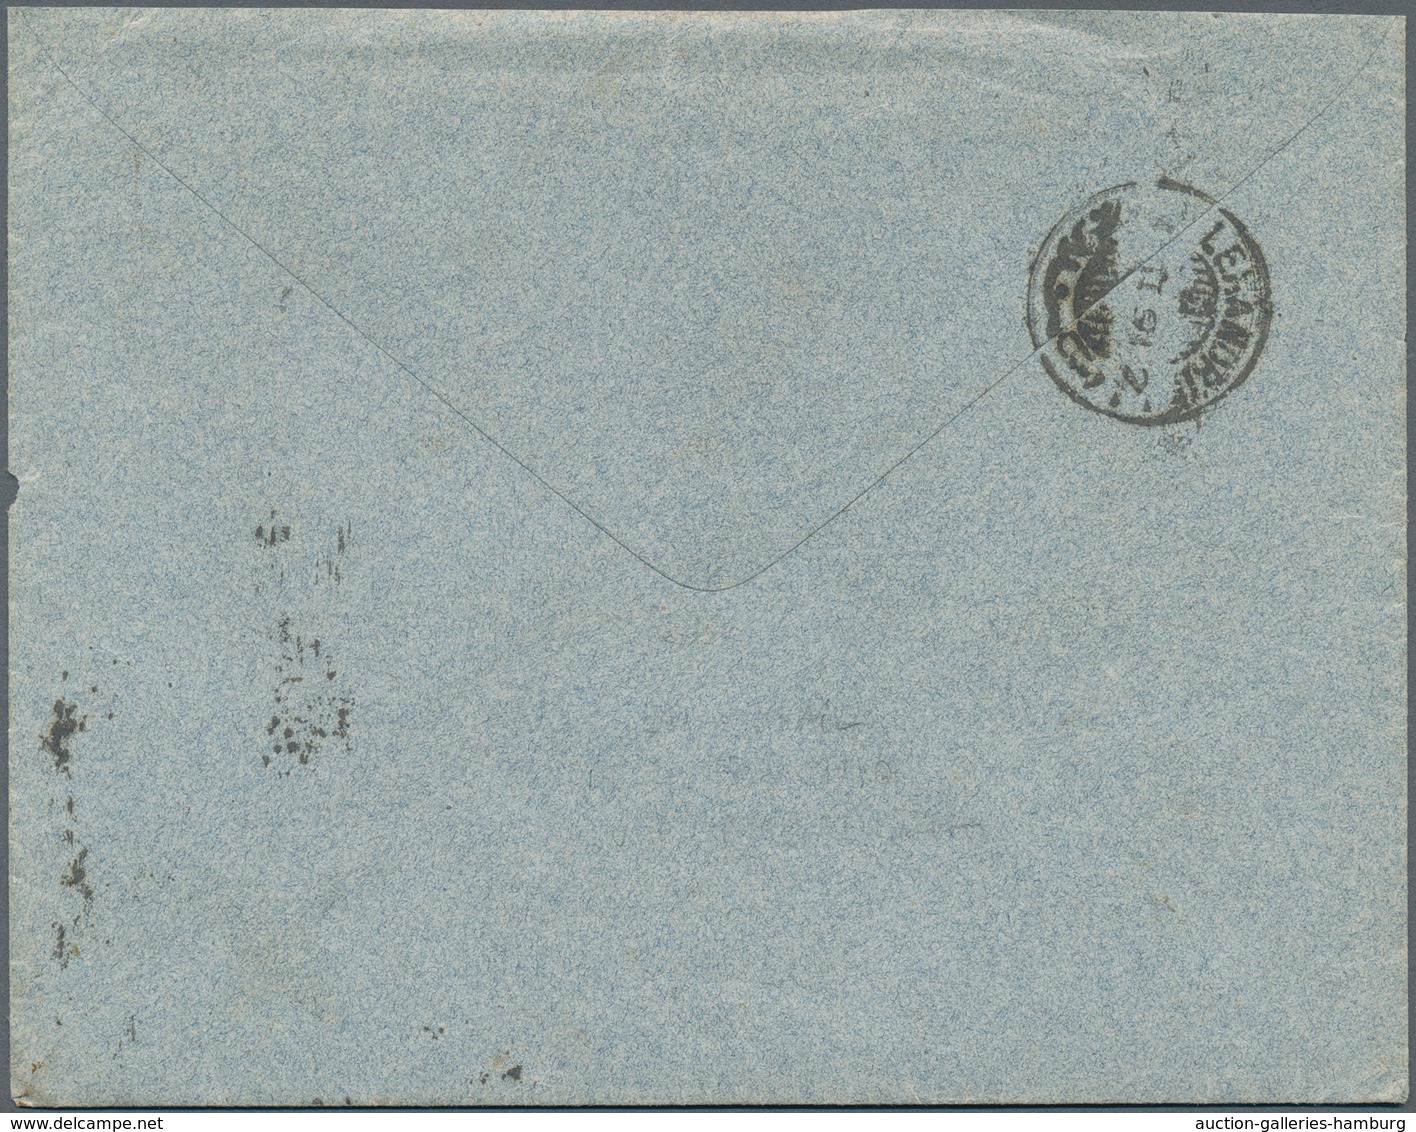 Russland: 1891:Commercial Cover (with Enclosed Letter In Greek), Printed "Georges Bougadis, Odessa", - Briefe U. Dokumente